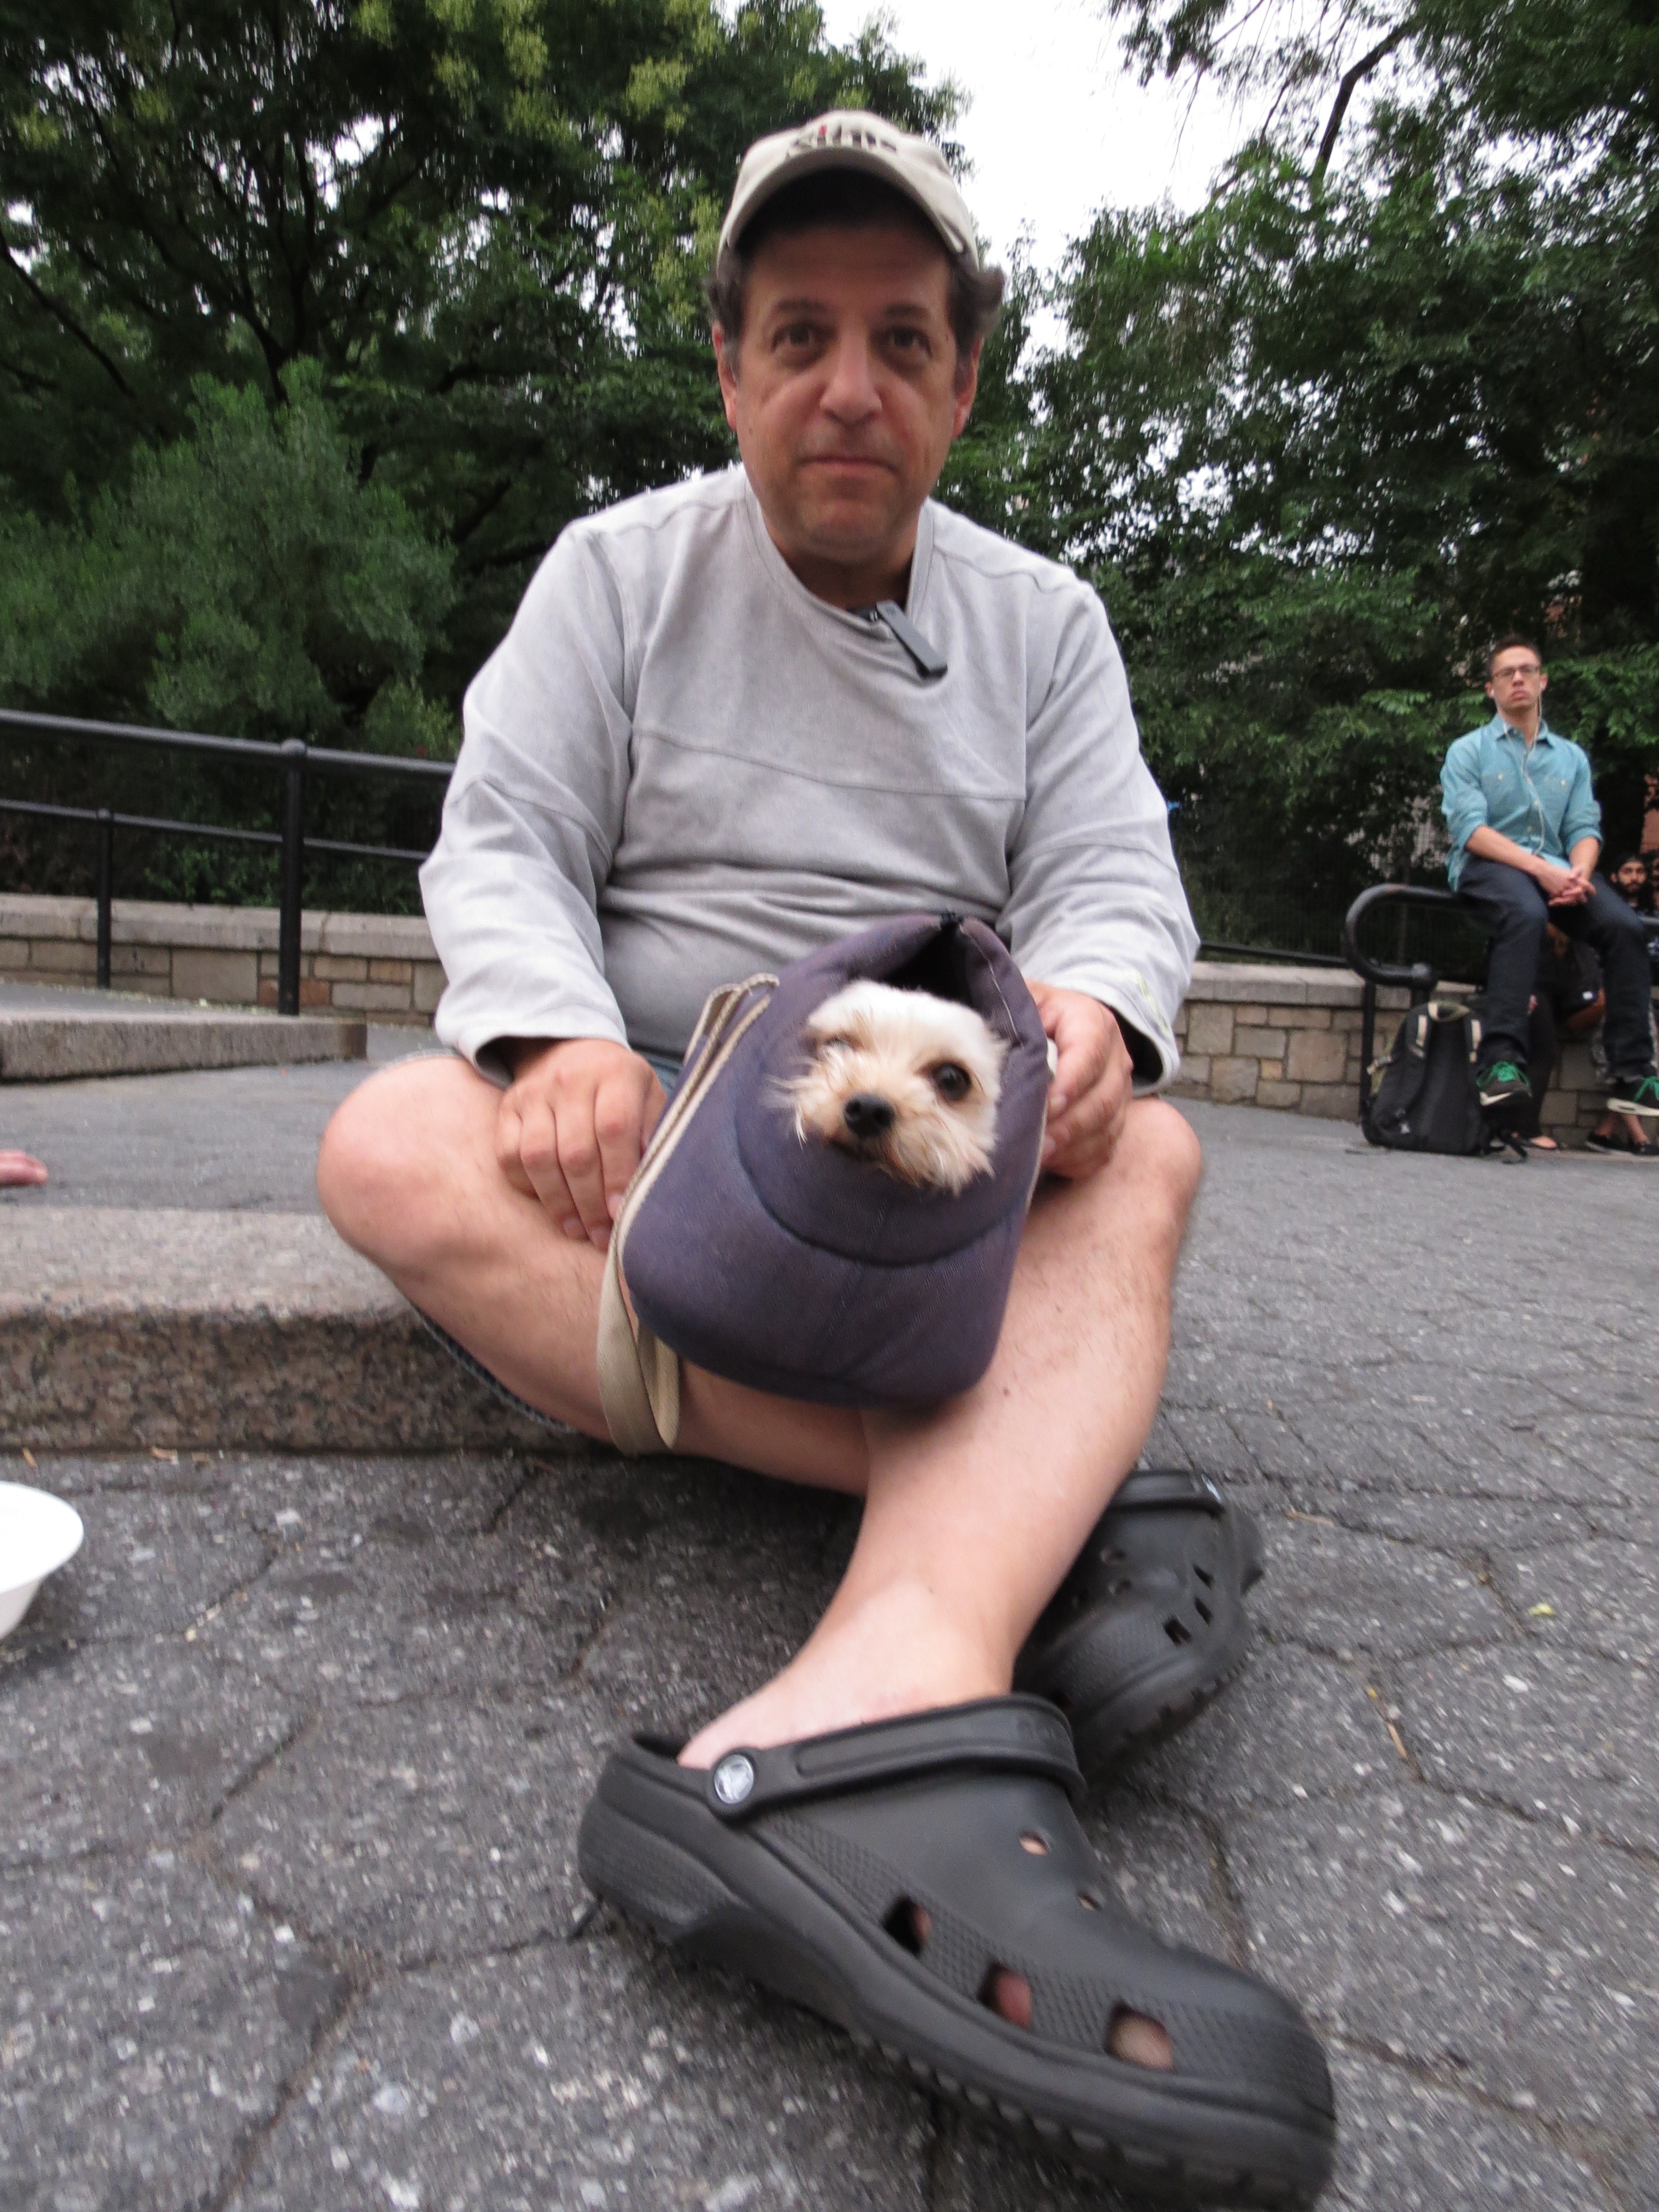 Man in Crocks with Dog in Case